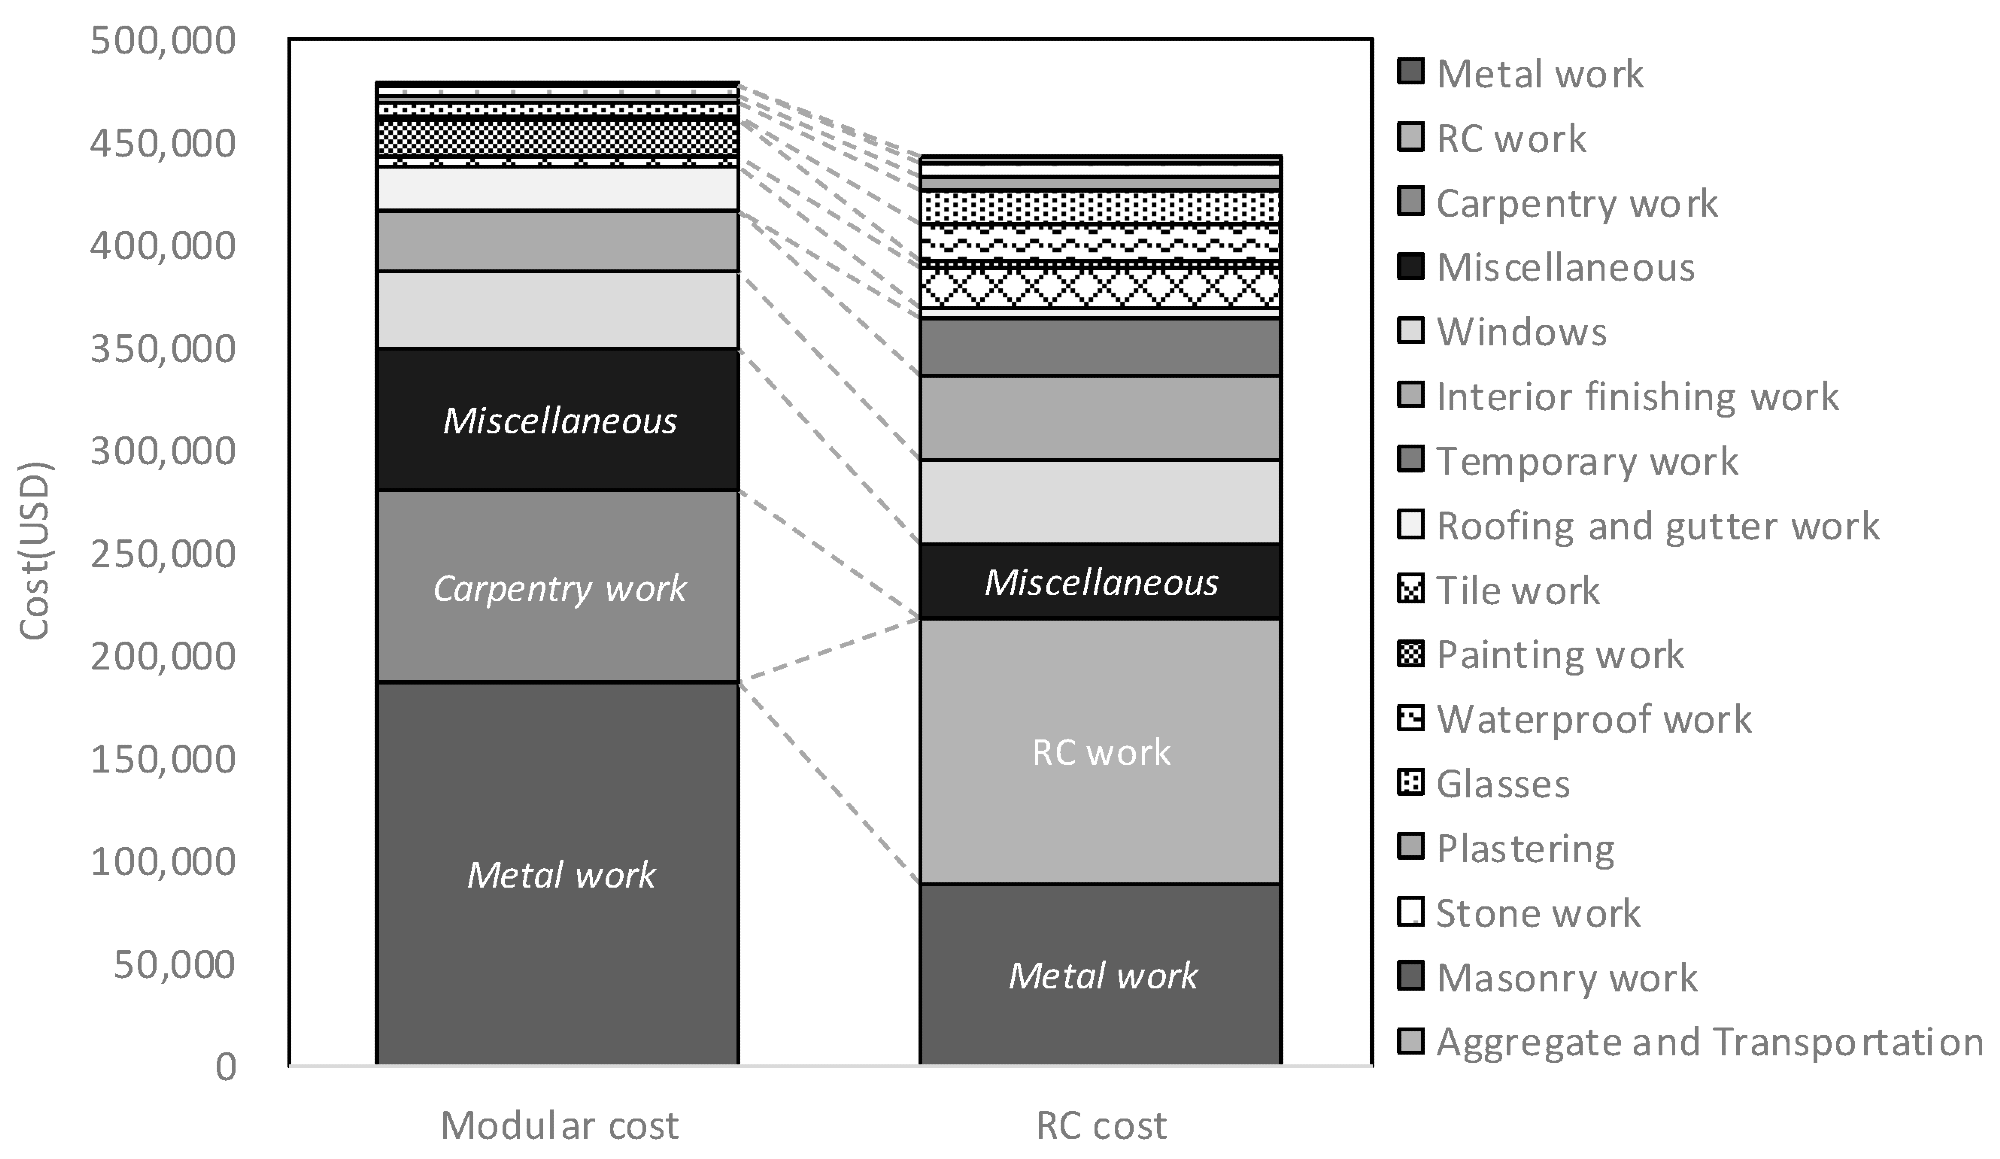 Comparison of modular construction and RC construction costs.